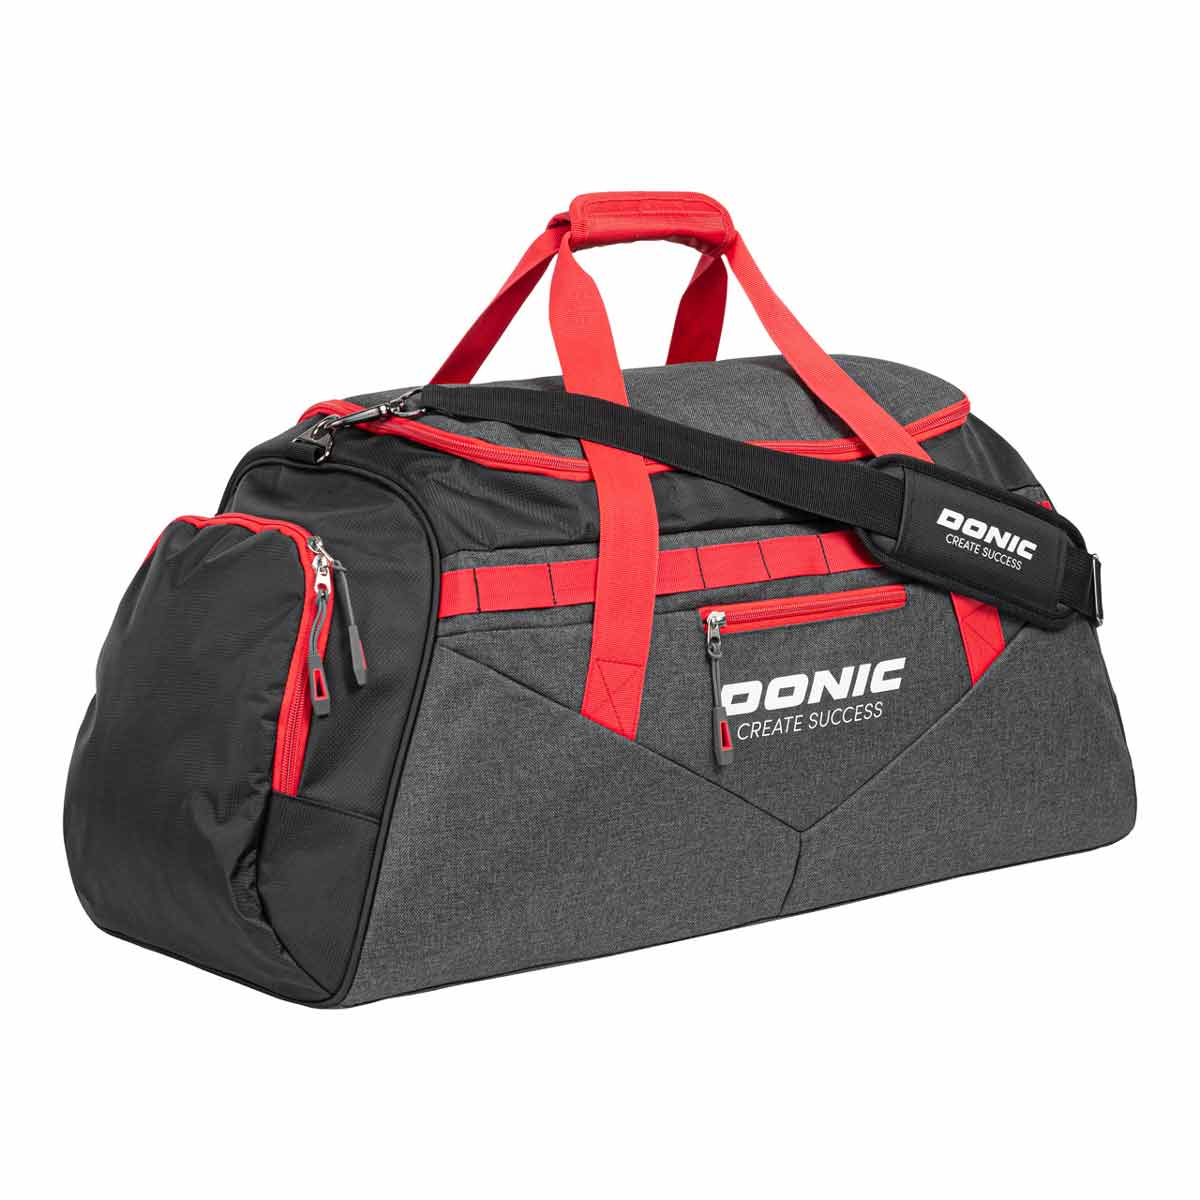 Donic Sportsbag Core anthracite/red